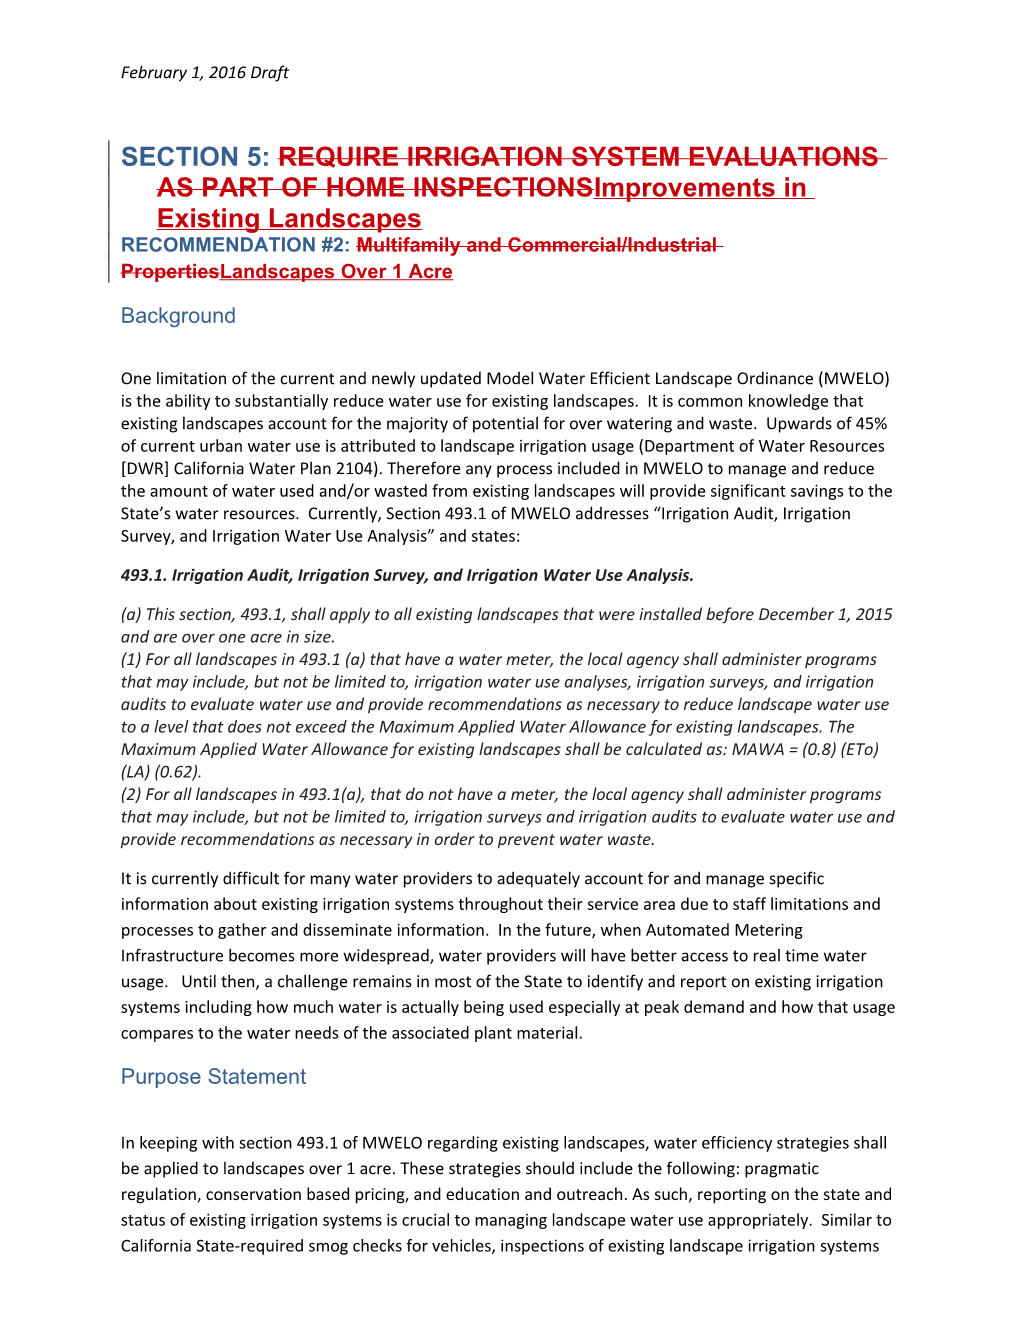 SECTION 5: REQUIRE IRRIGATION SYSTEM EVALUATIONS AS PART of HOME Inspectionsimprovements